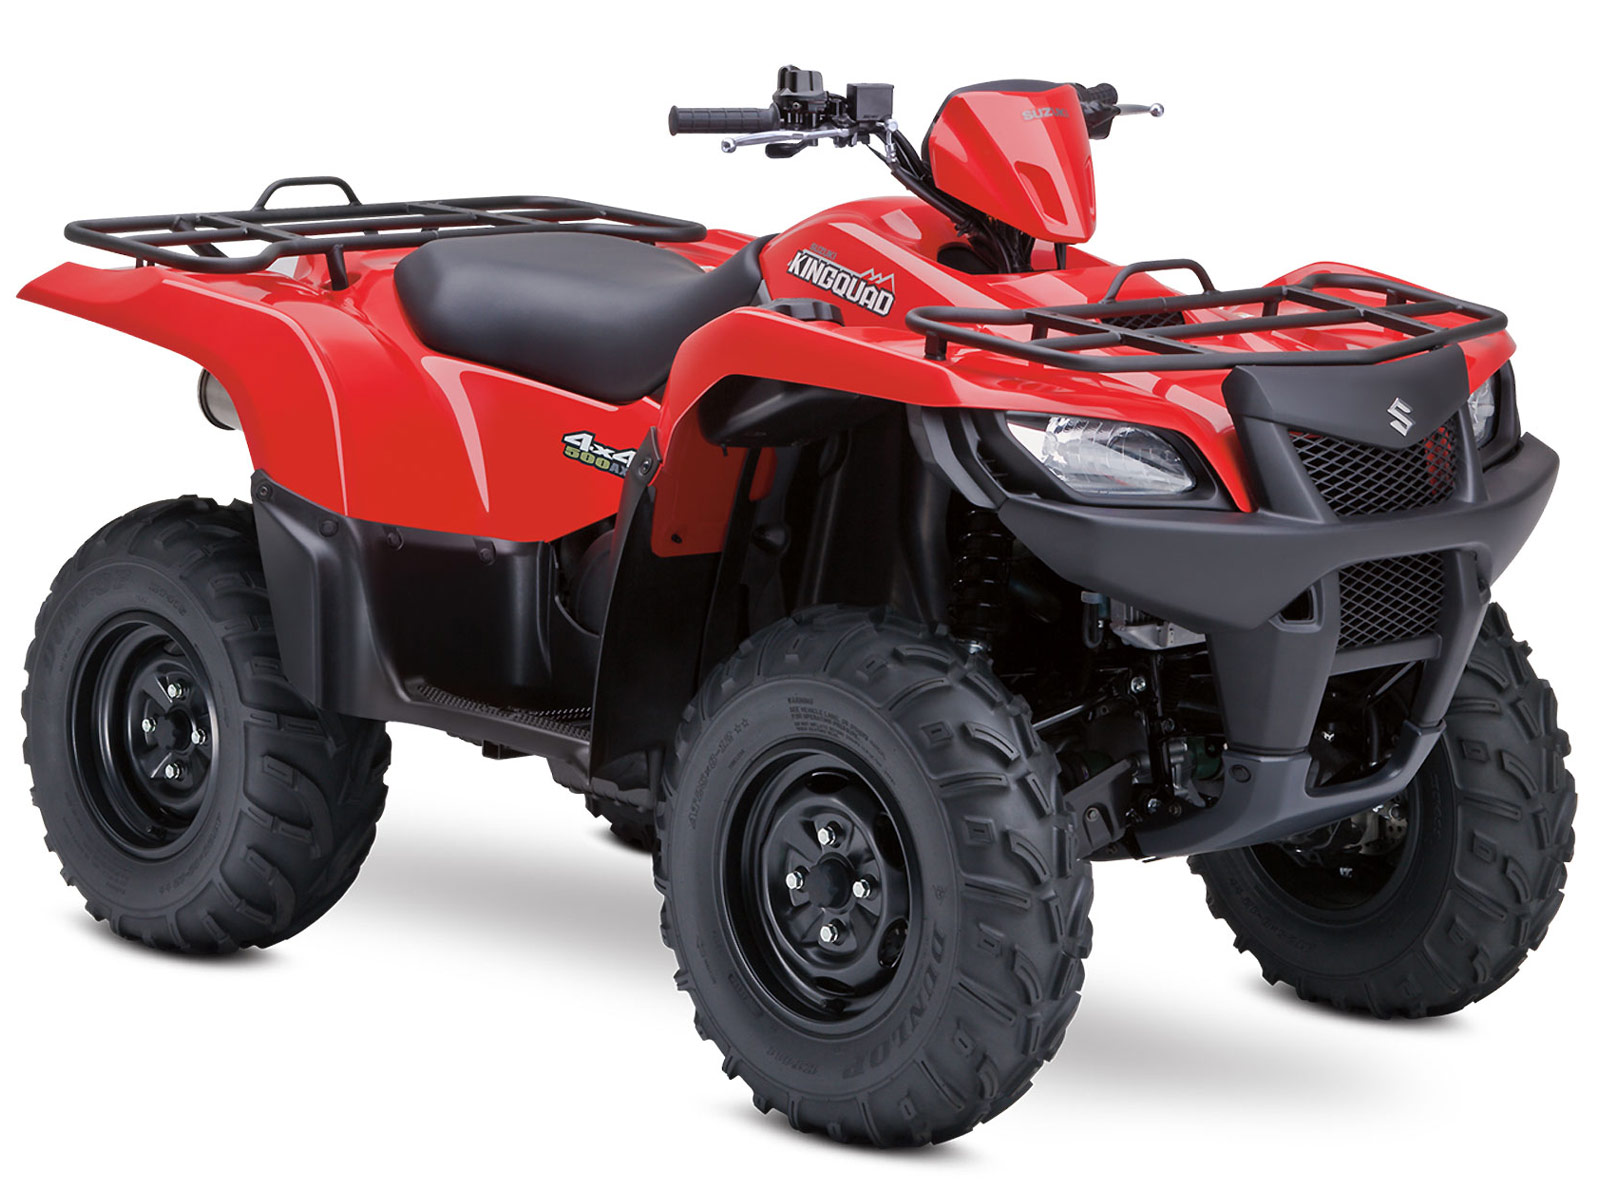 Suzuki Insurance information   2013 KingQuad 500AXi pictures